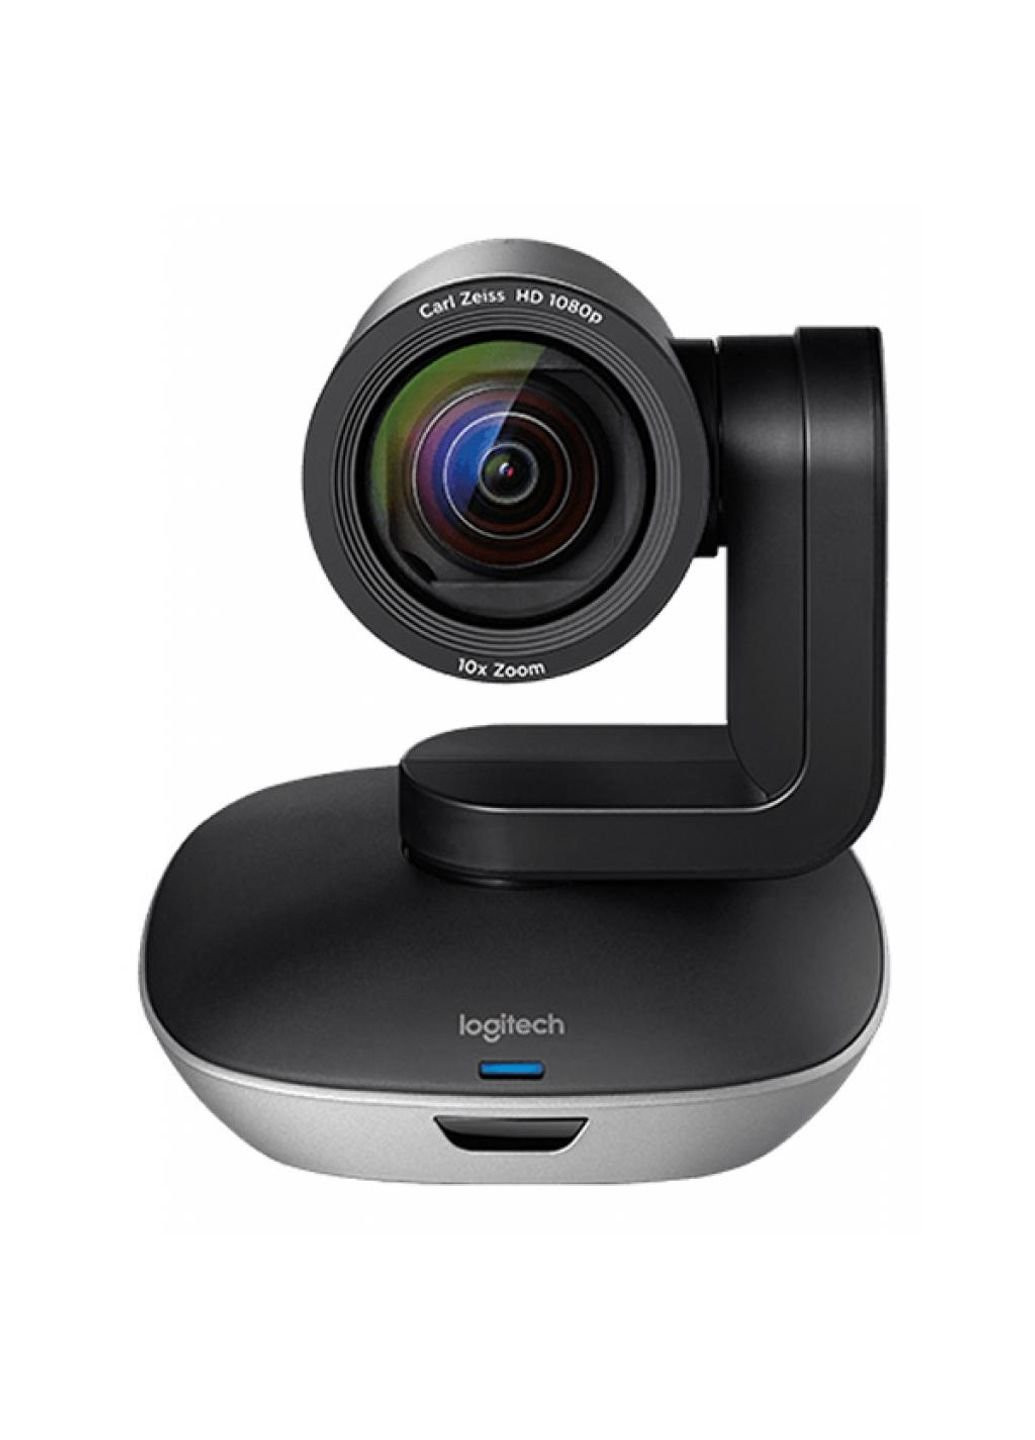 Веб-камера Group Video conferencing system (960-001057) Logitech (250017160)